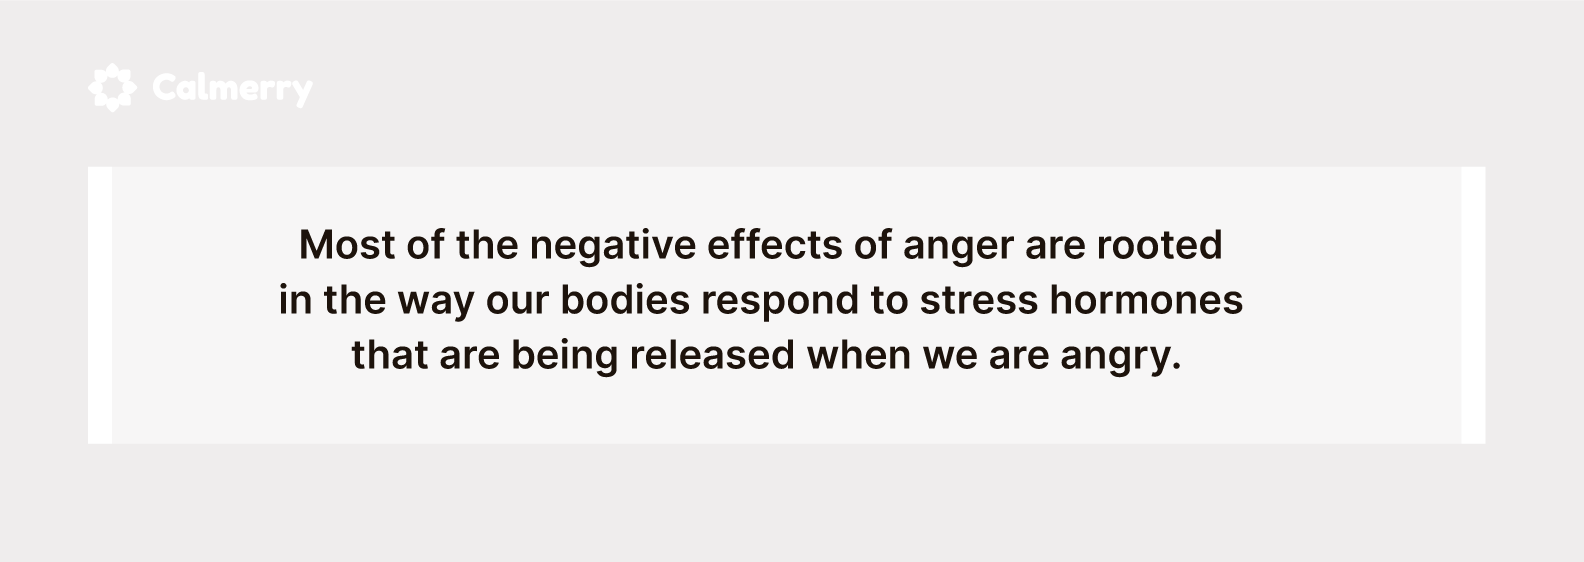 Many effects of anger are rooted in stress